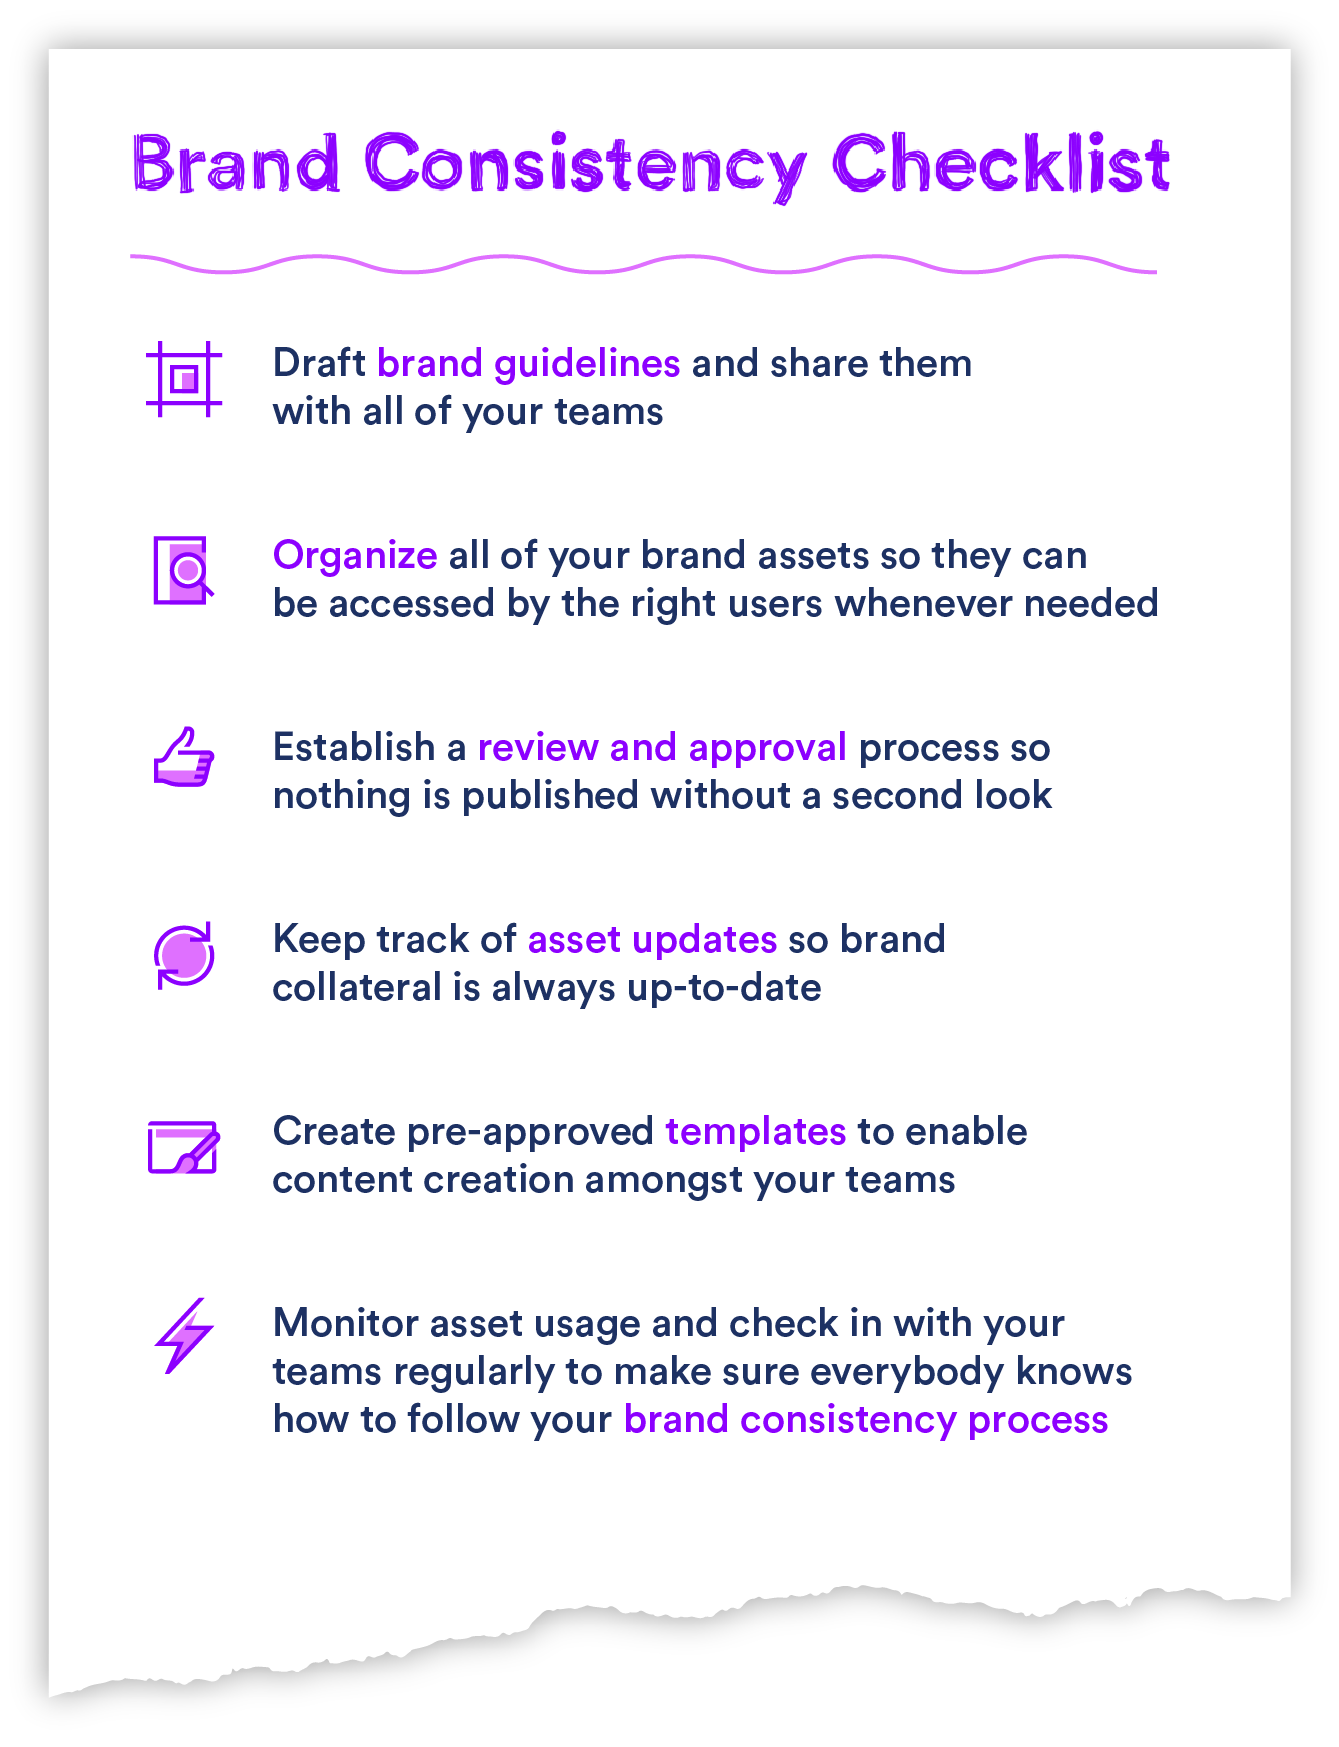 Graphic of the brand consistency checklist